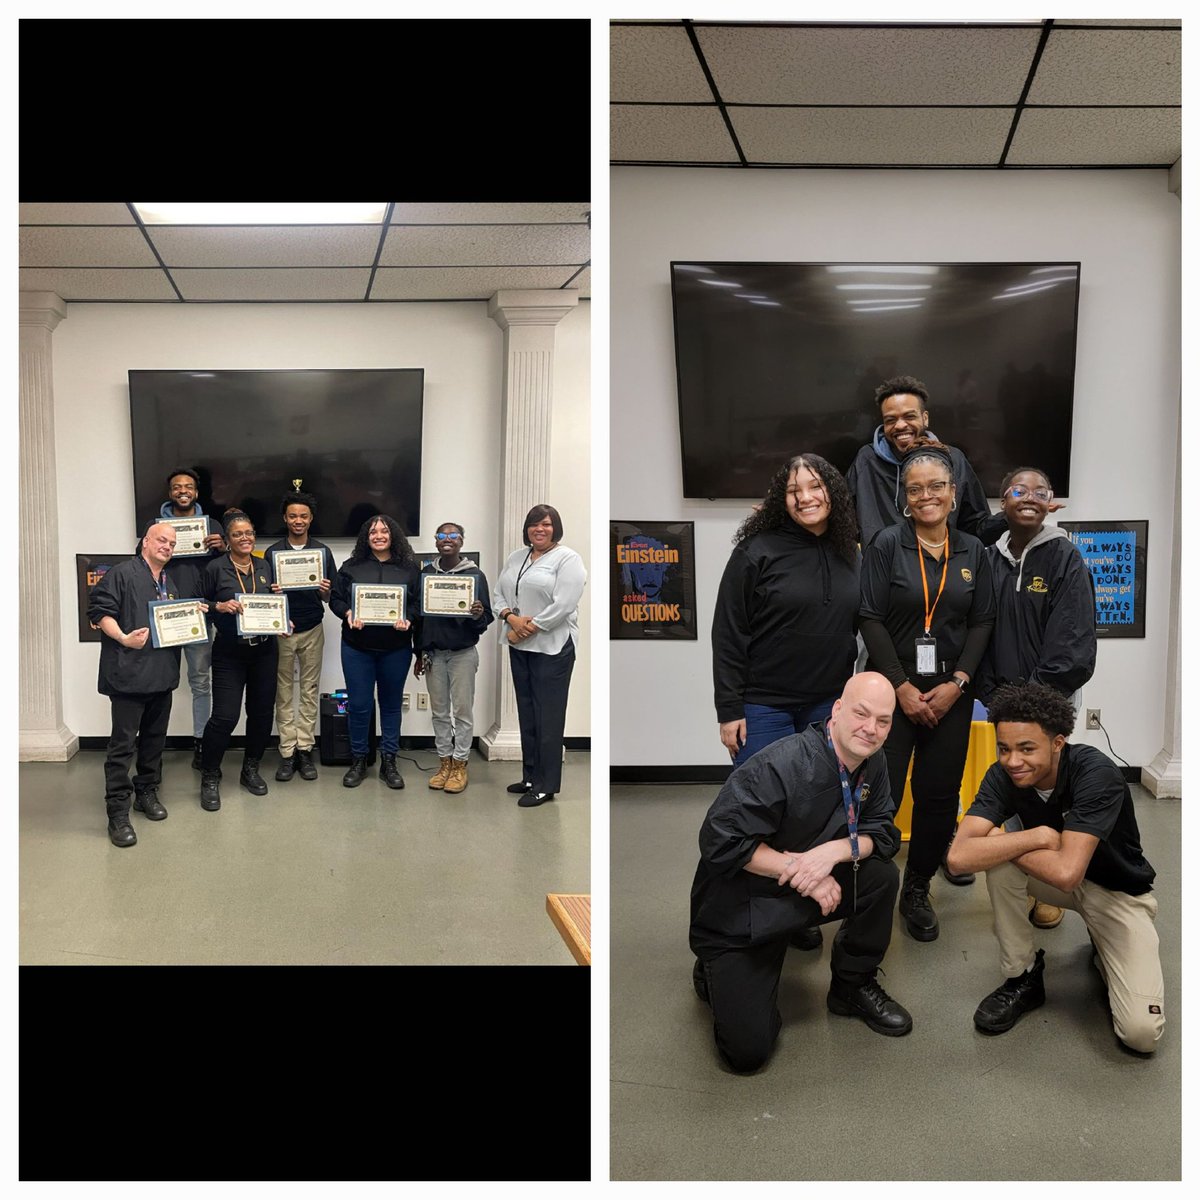 #TeamPHLSnaps @RayBarczak @daveortone @RaymondChew95 @JamesSm03402046 @BobKee6 @BickerstaffMar @UPSers Congratulations to FSTS class #3! Now it's time to apply the knowledge and skill set you have learned to the operations. Safety and Methods driven!